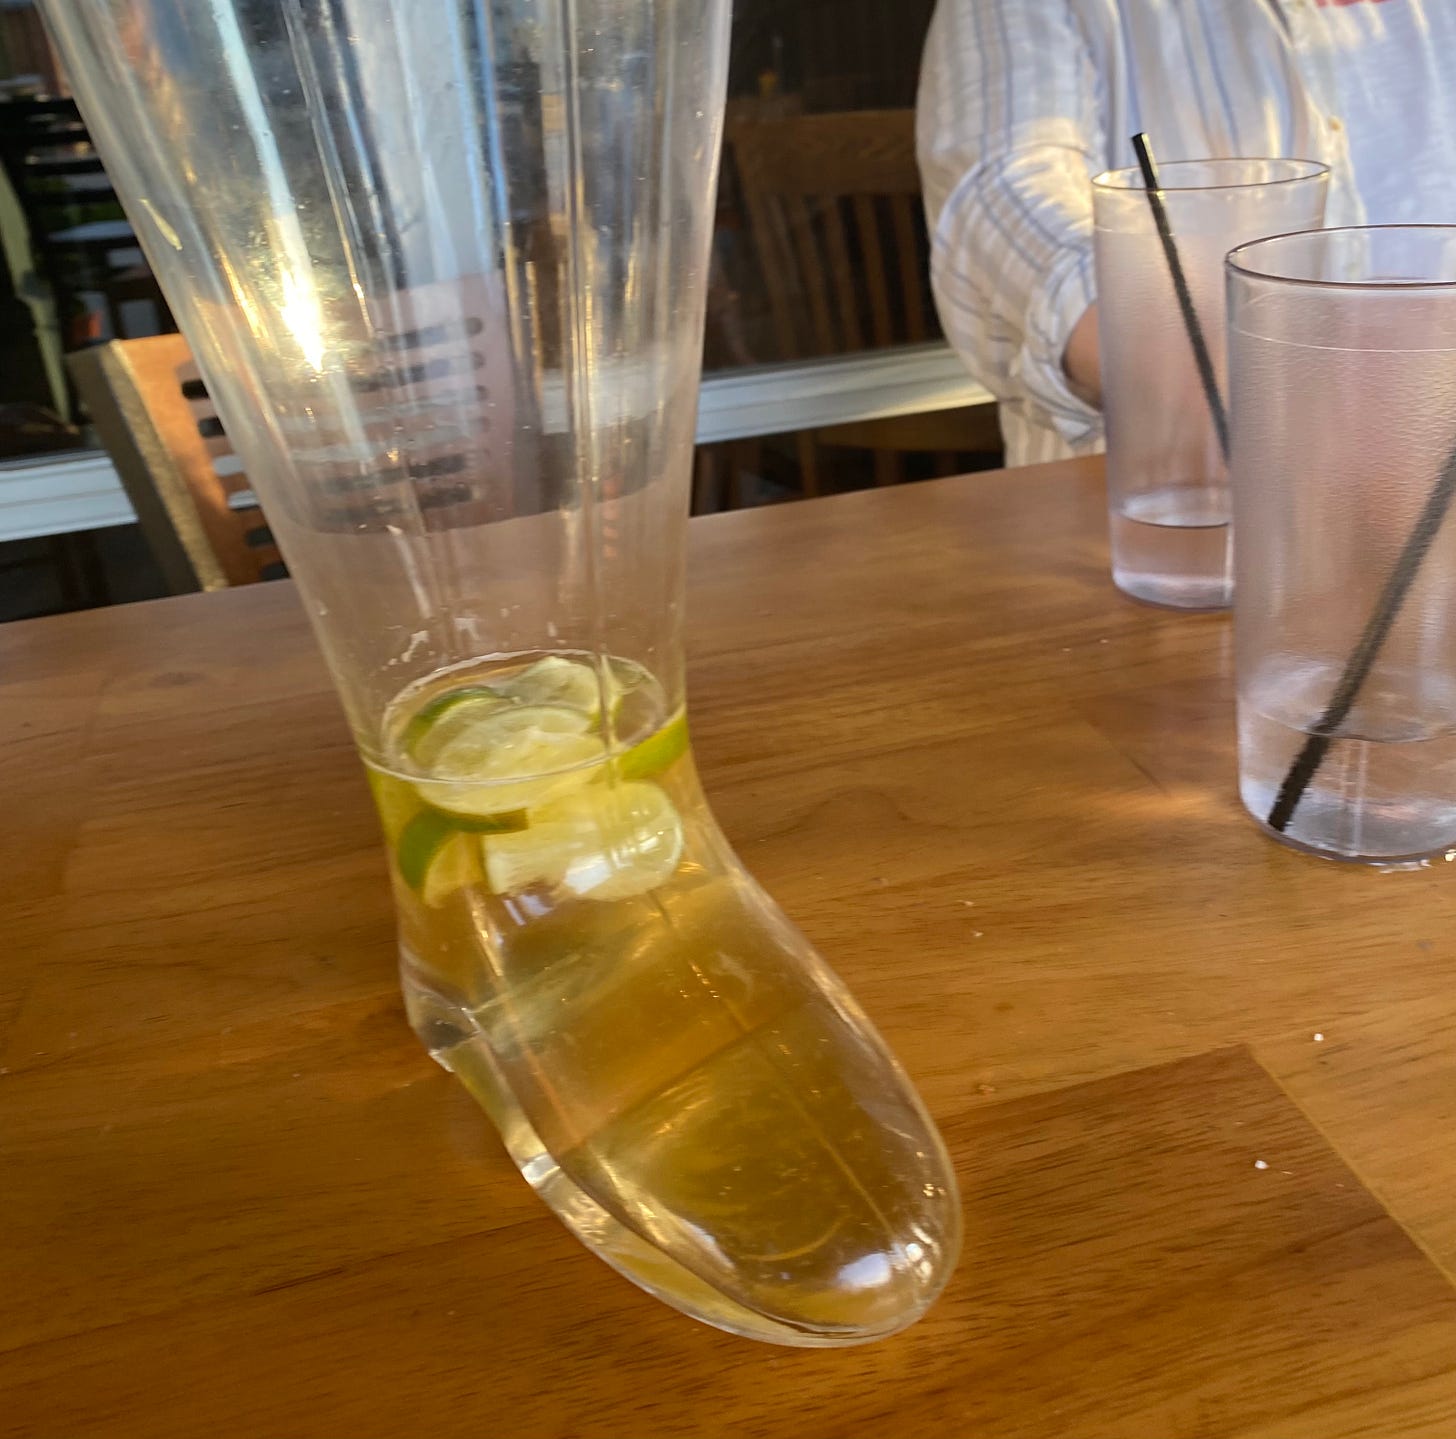 A beer boot, but just the shoe part is full and there's like twelve limes.